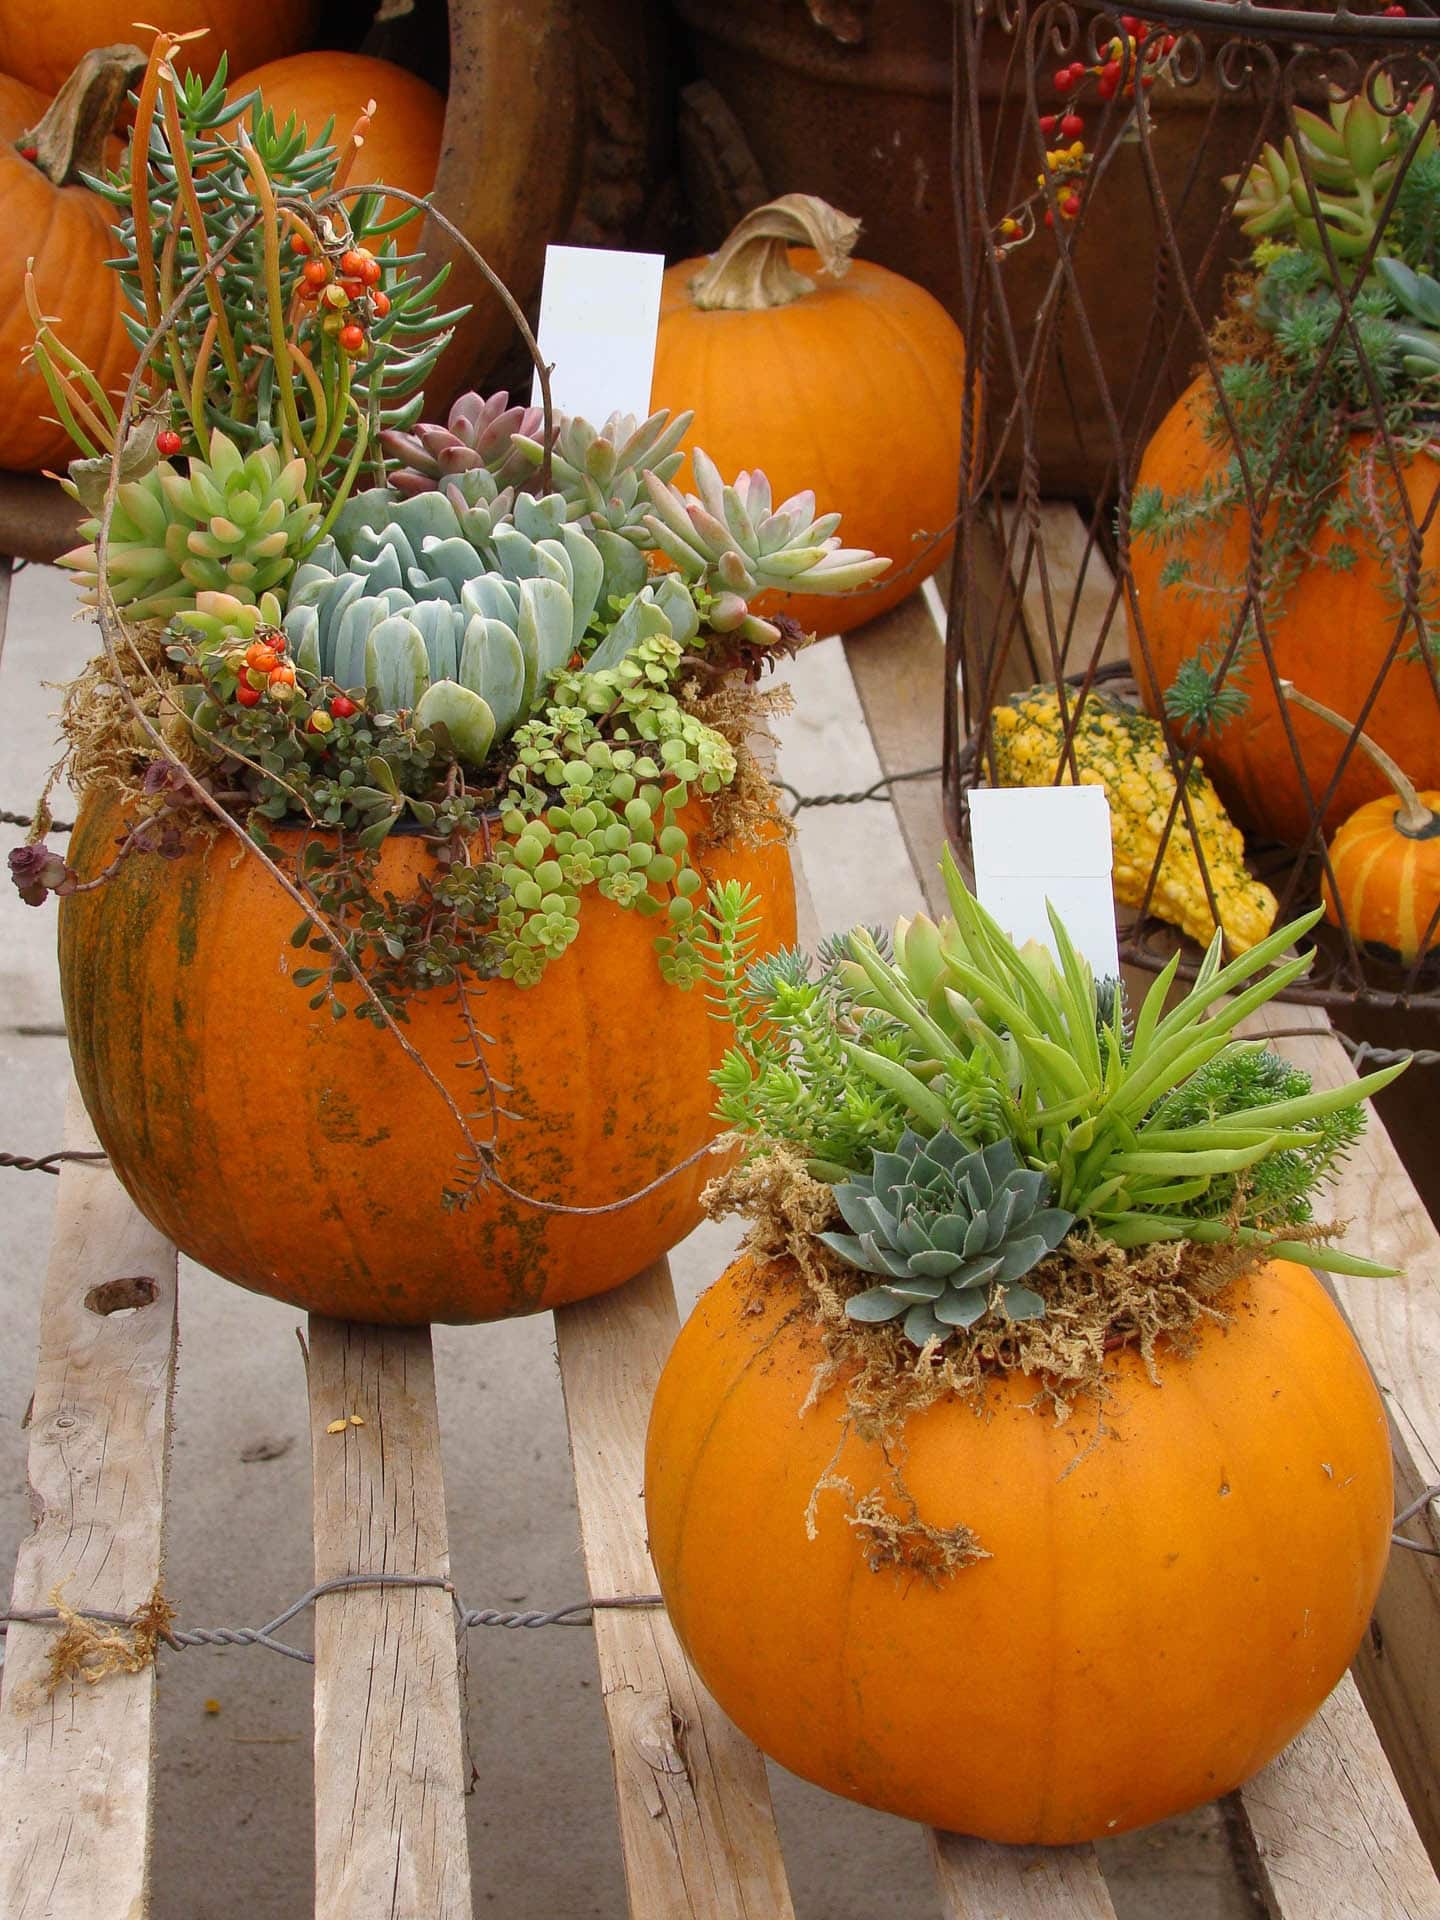 Pumpkins with succulents planted in them